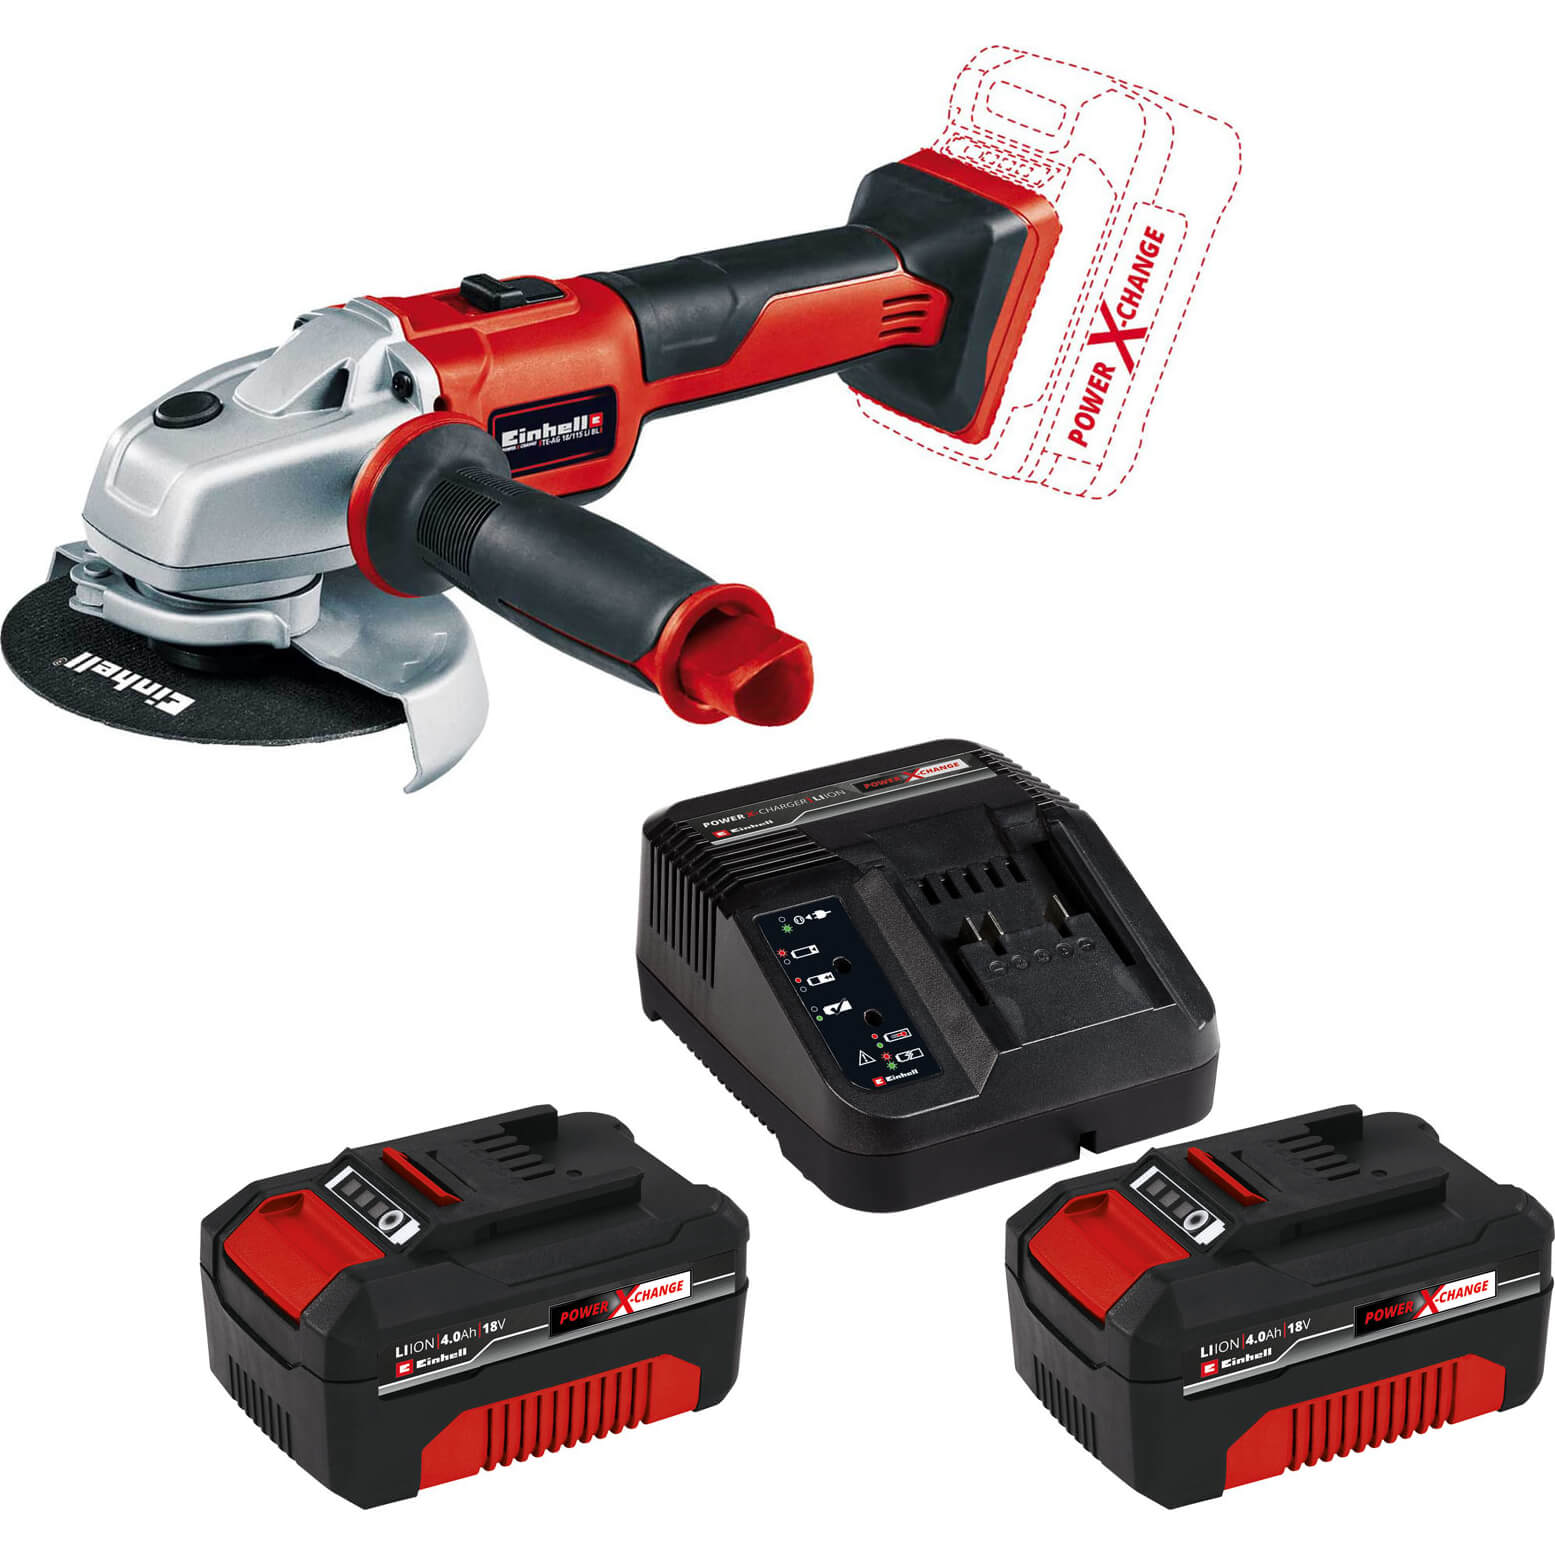 Image of Einhell AXXIO 18v Cordless Brushless Angle Grinder 115mm 2 x 4ah Li-ion Charger No Case